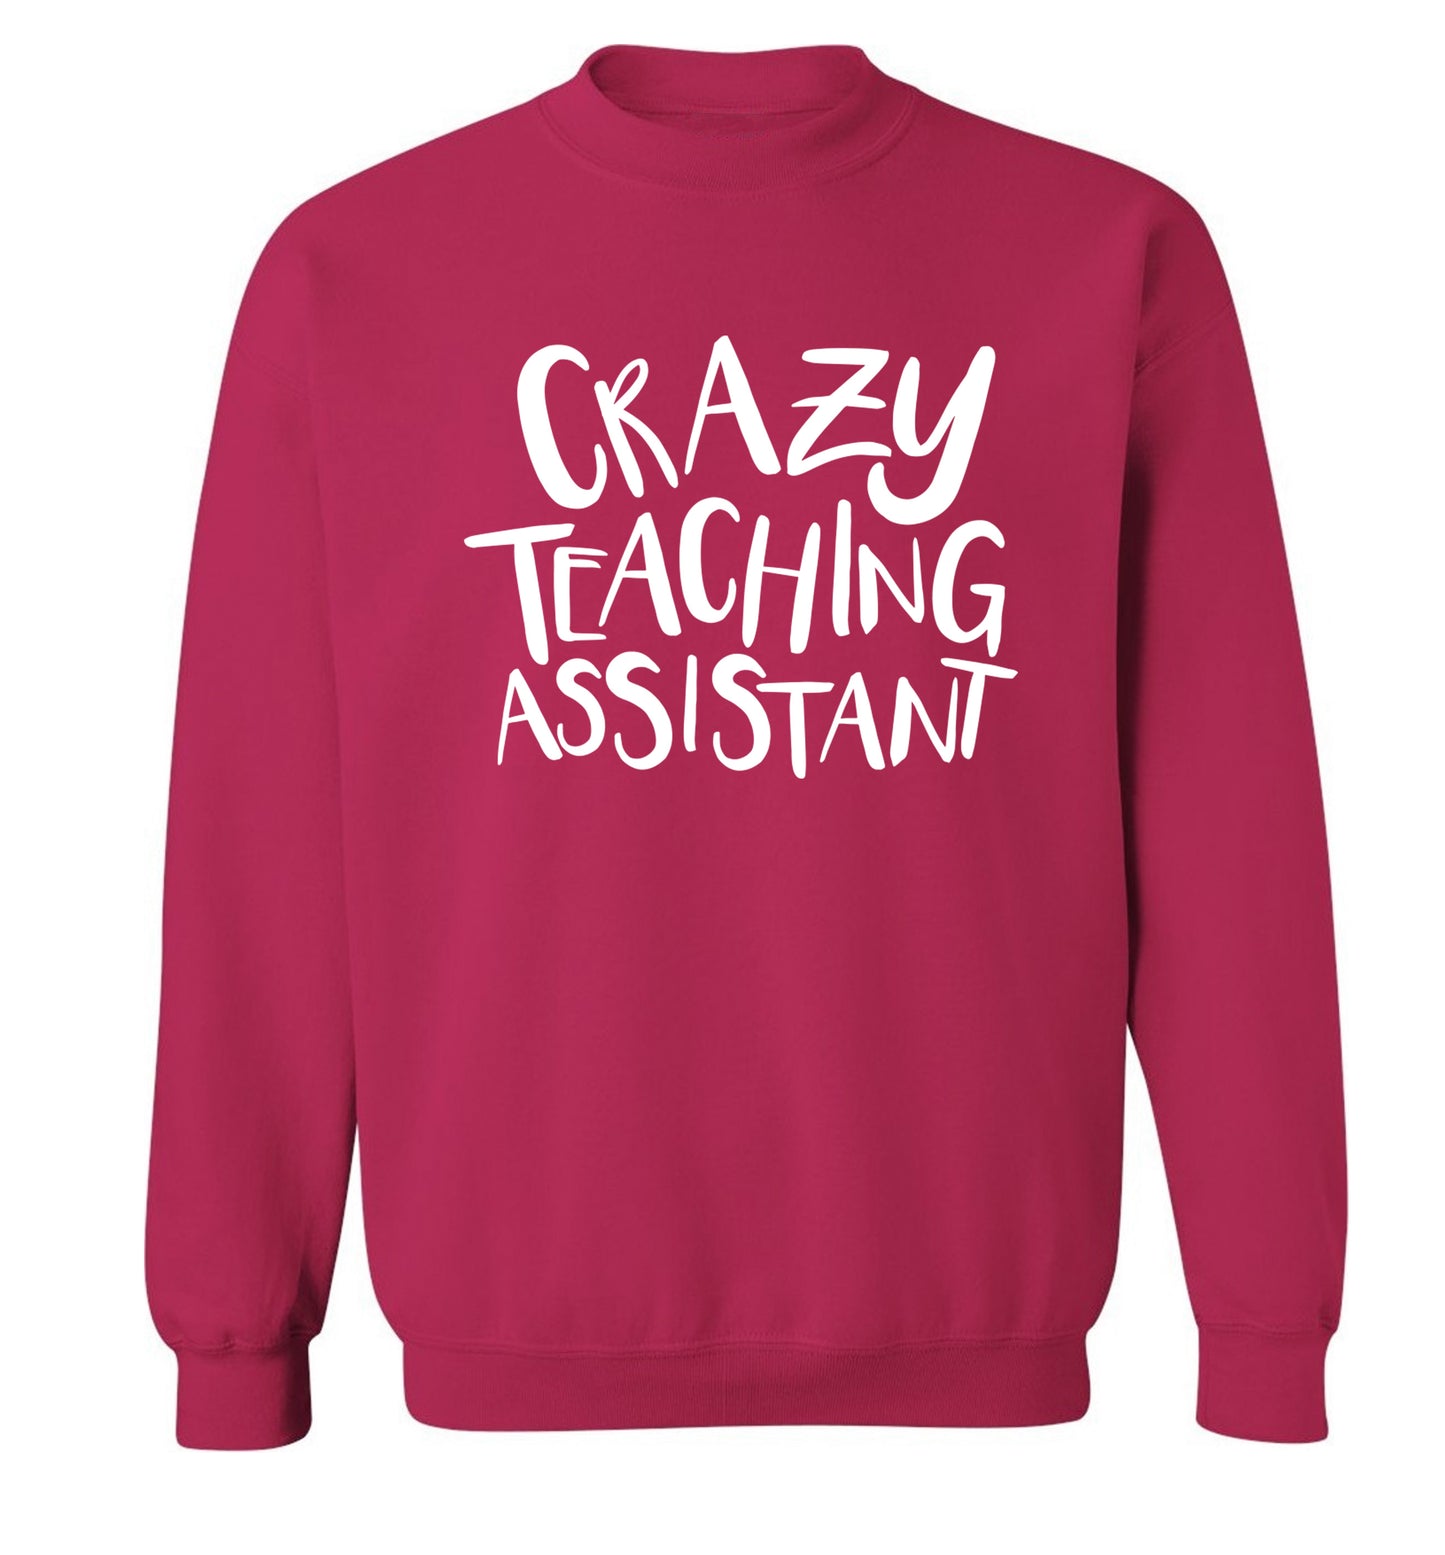 Crazy Teaching Assistant Adult's unisex pink Sweater 2XL